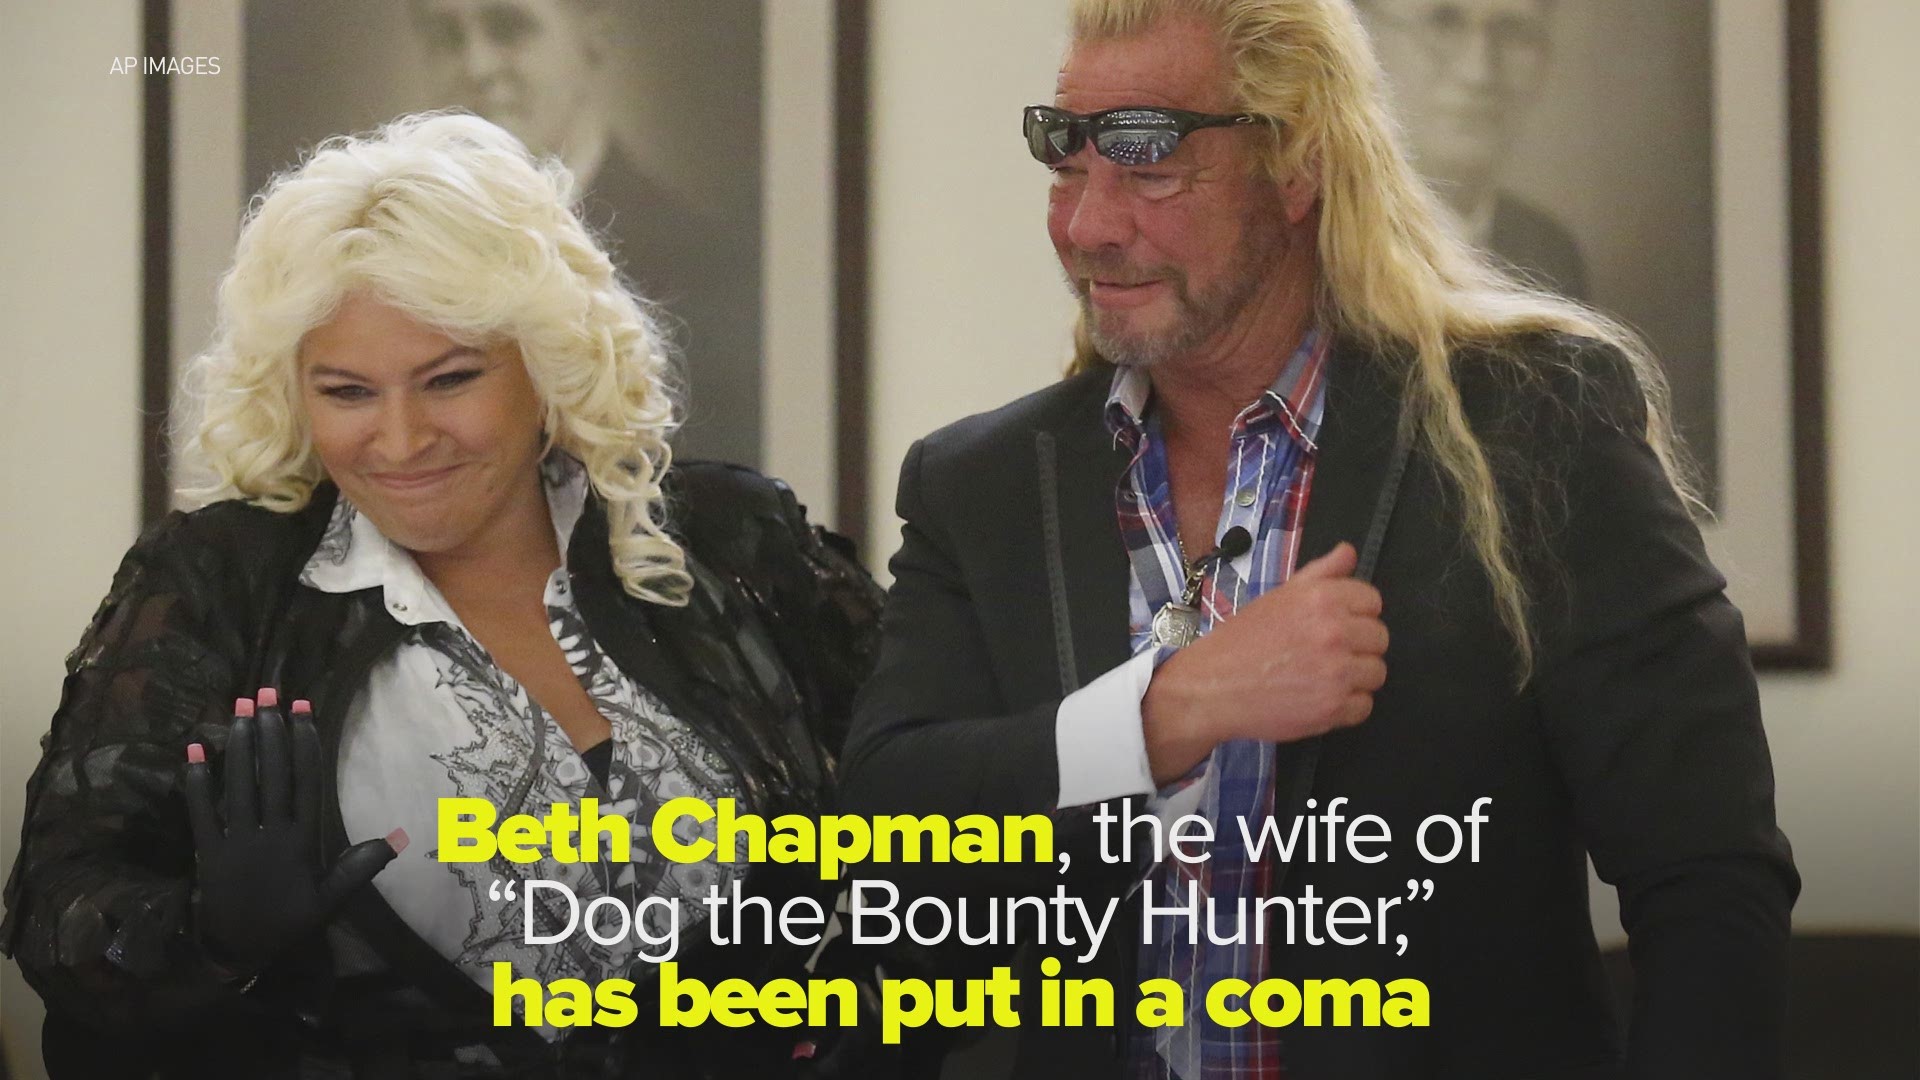 The family of Beth Chapman, the wife of 'Dog the Bounty Hunter,' is asking for prayers after she was placed in a medically induced coma.